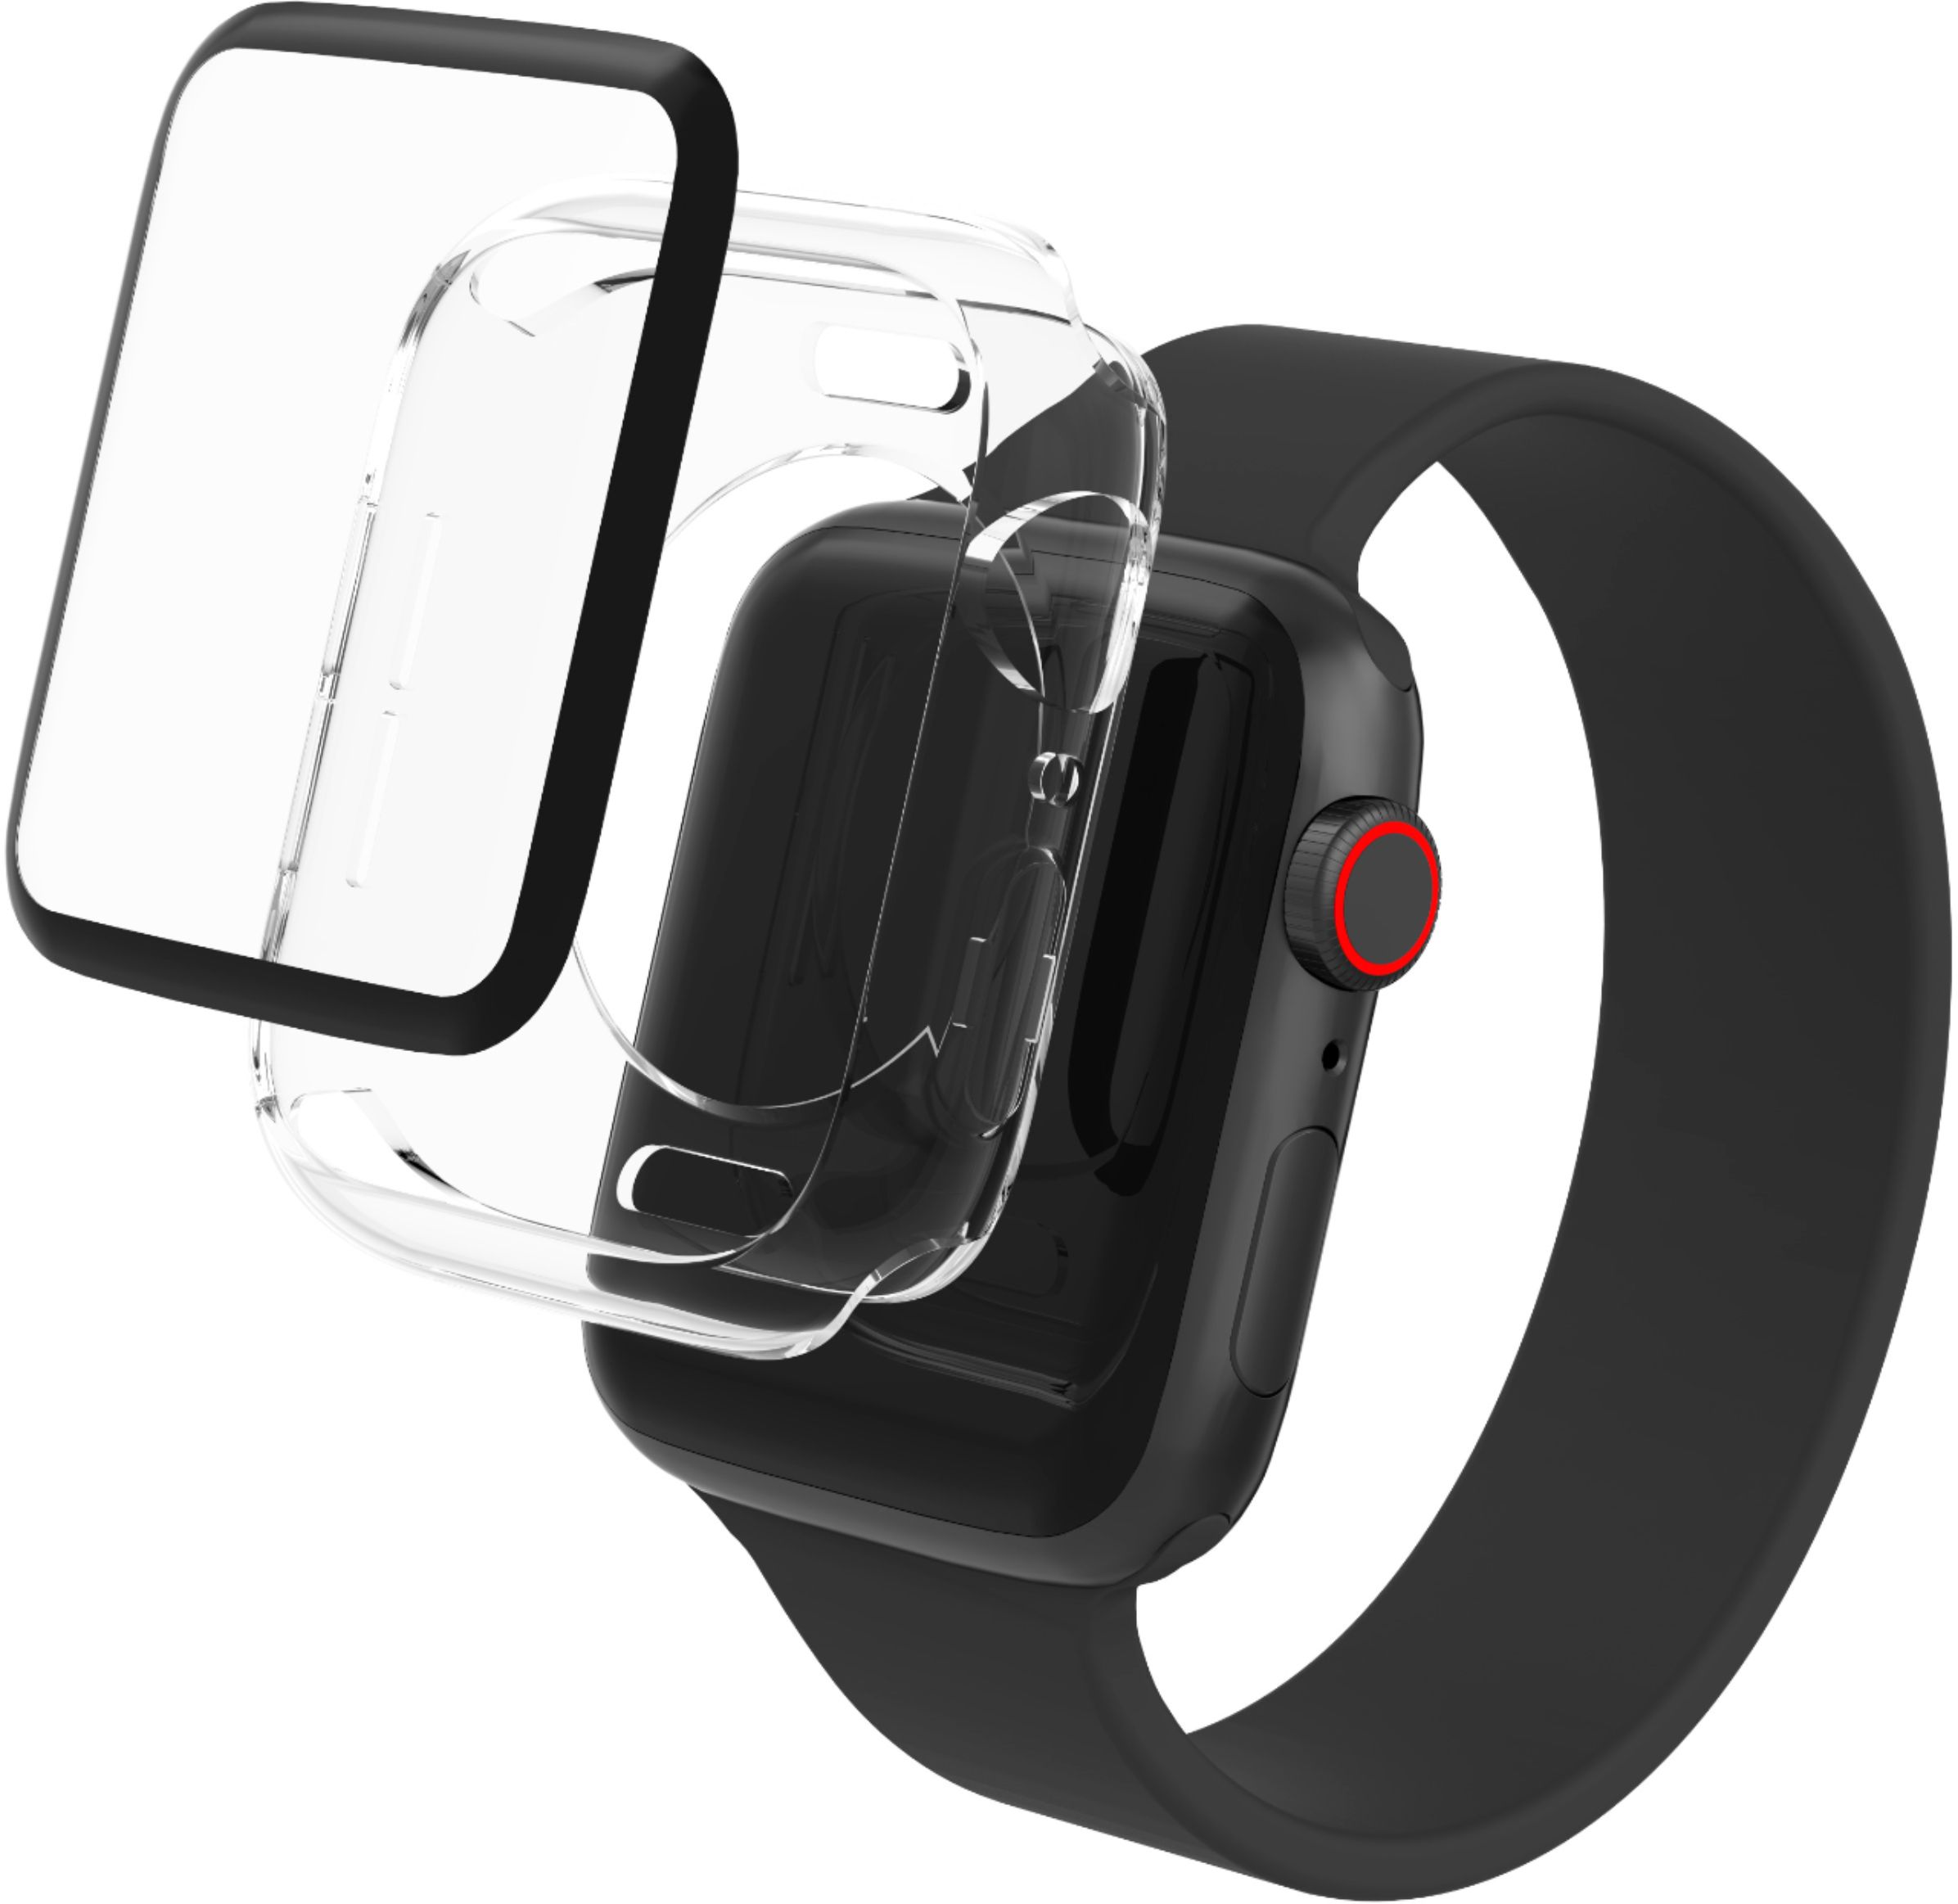 Angle View: ZAGG - InvisibleShield GlassFusion+ 360 Flexible Hybrid Screen Protector + Bumper for Apple Watch Series 4/5/SE/6 40mm - Clear